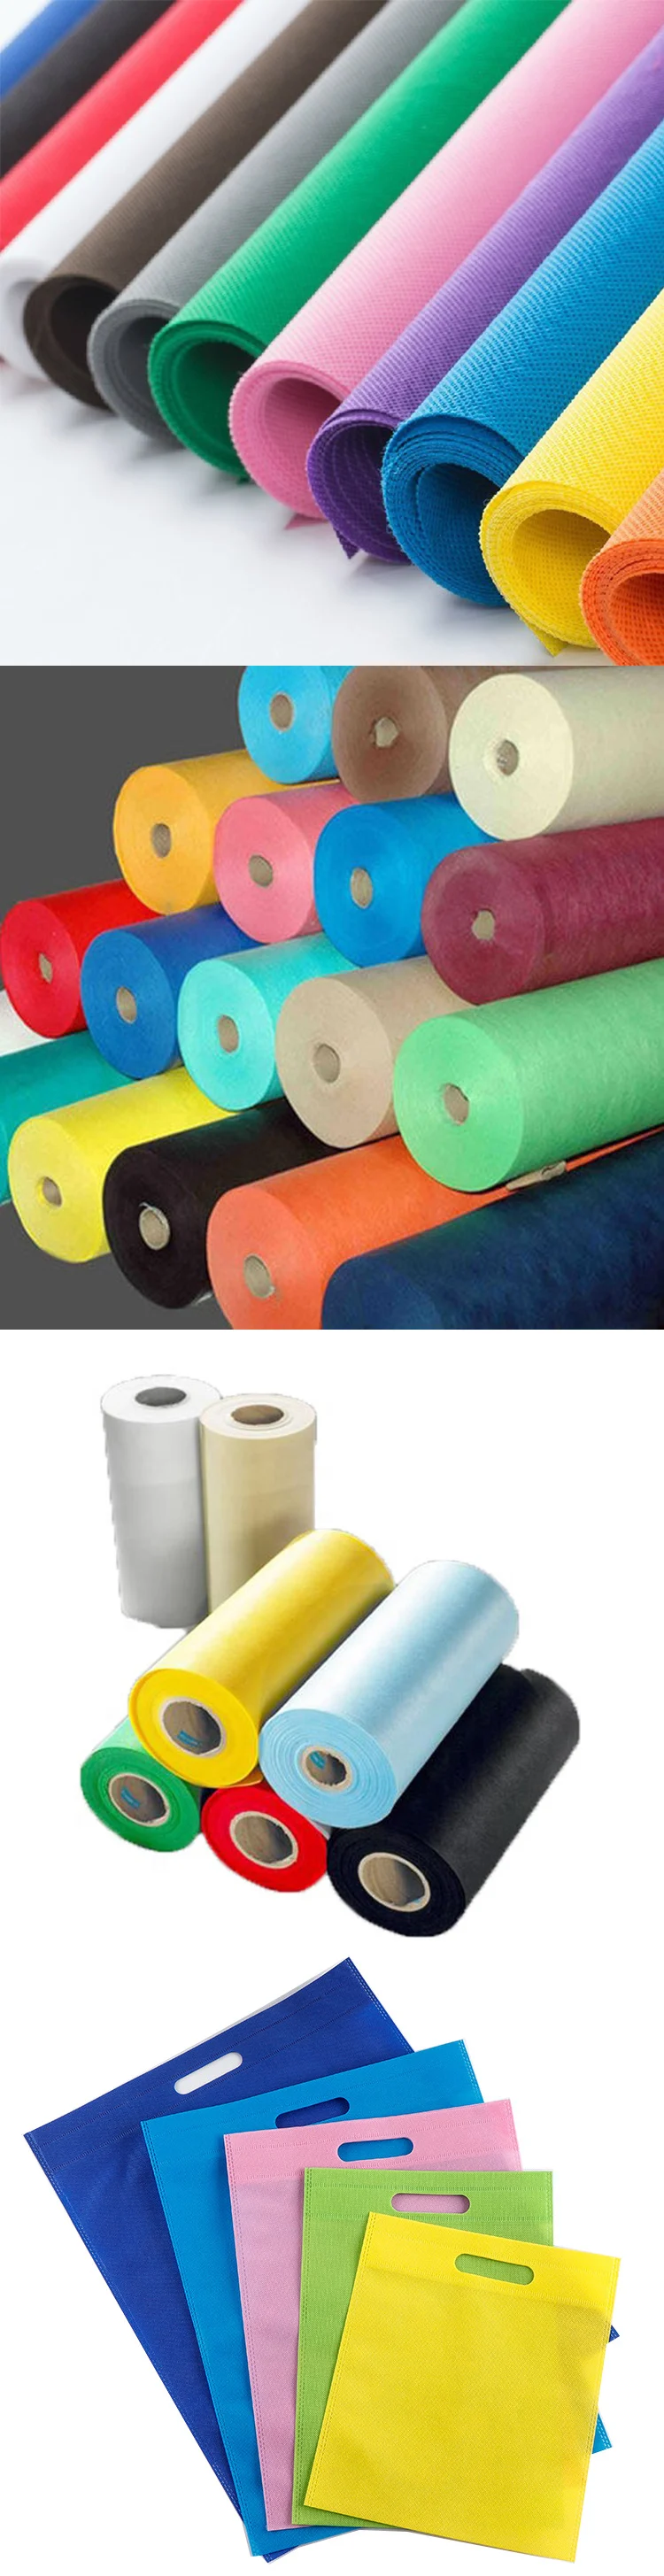 Factory Price 20GSM 25GSM 100% Polypropylene Material Breathable Skin Soft Non Woven Fabric